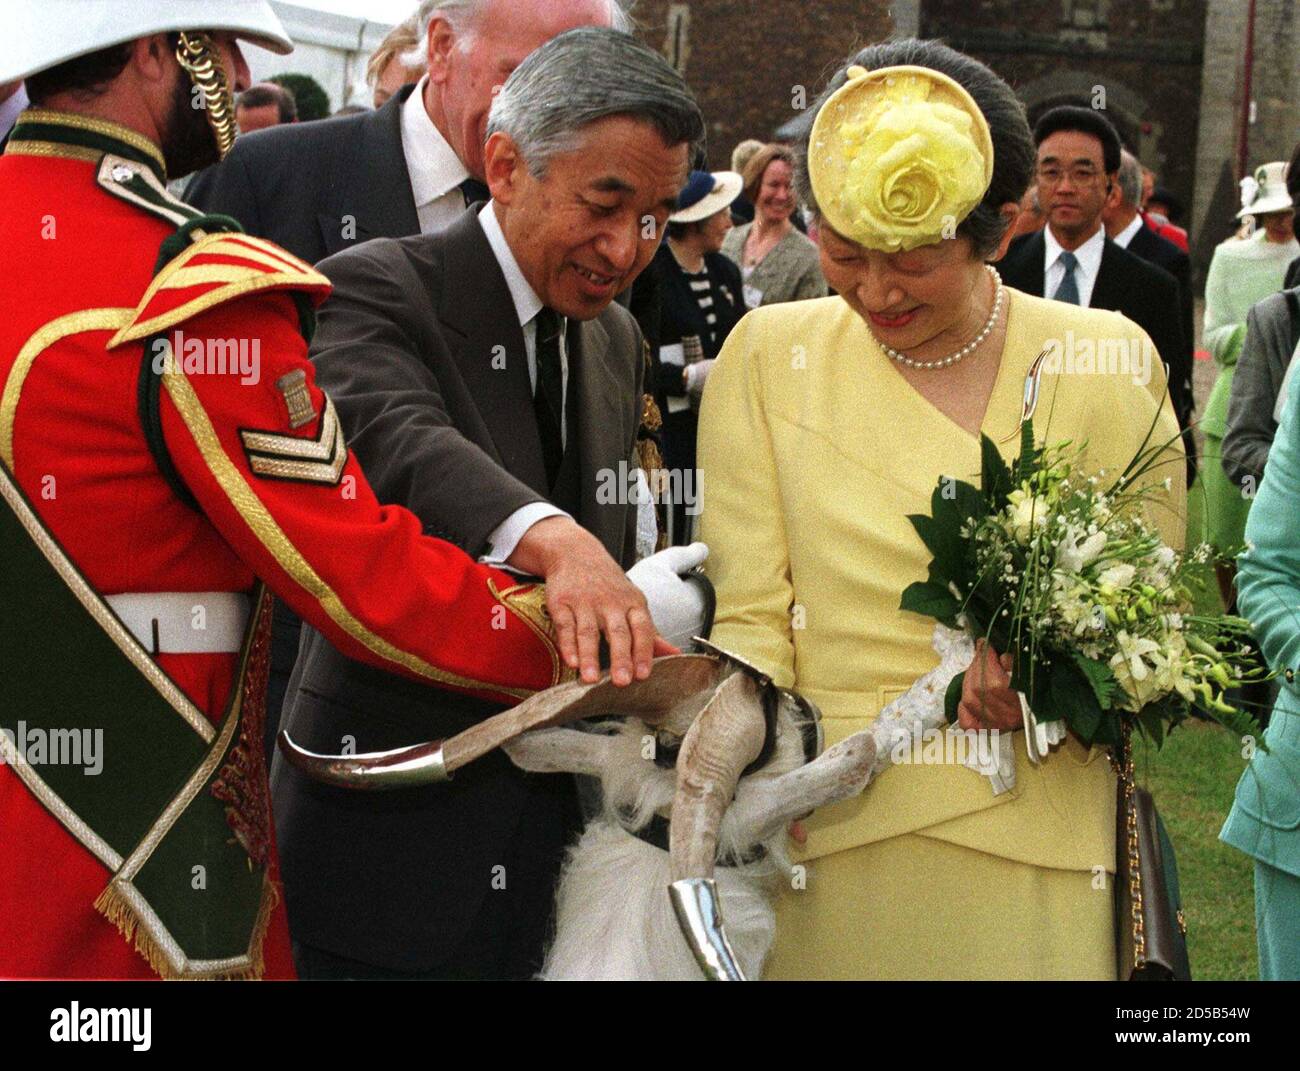 Japanese Emperor Akihito (C) and Empress Michiko meet Shenkin, a 22-month-old Royal Windsor White Goat who is the Regimental mascot for the 2nd Battalion of the Royal Regiment of Wales, during their visit to Cardiff Castle in Wales May 27. The Emperor's visit has sparked controversy among former Japanese Prisoners of War who are demanding an apology and compensation for the treatment they received at the hands of the Japanese during World War II.  SR/EB Stock Photo